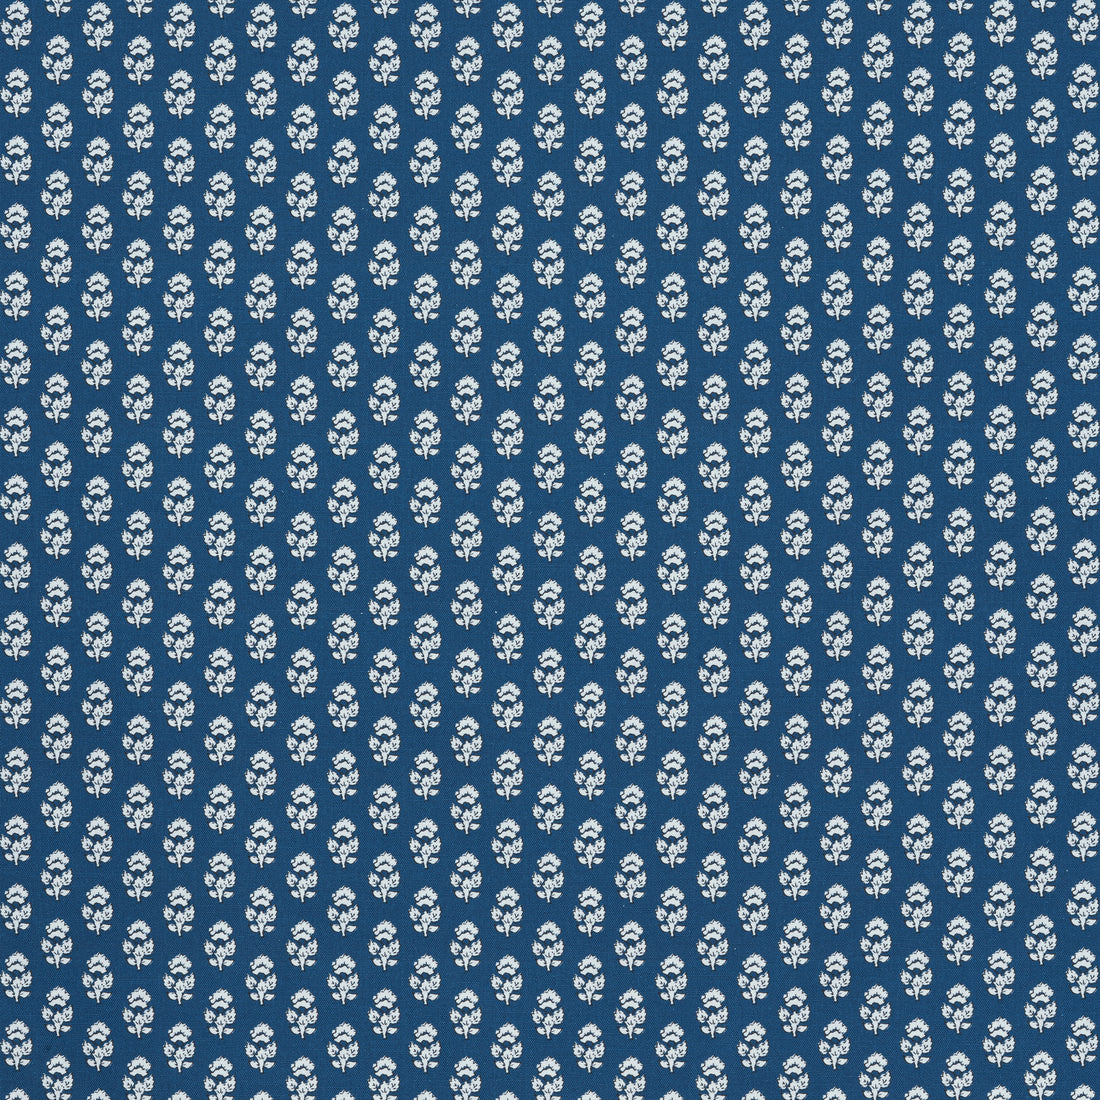 Julian fabric in navy color - pattern number AF15163 - by Anna French in the Antilles collection